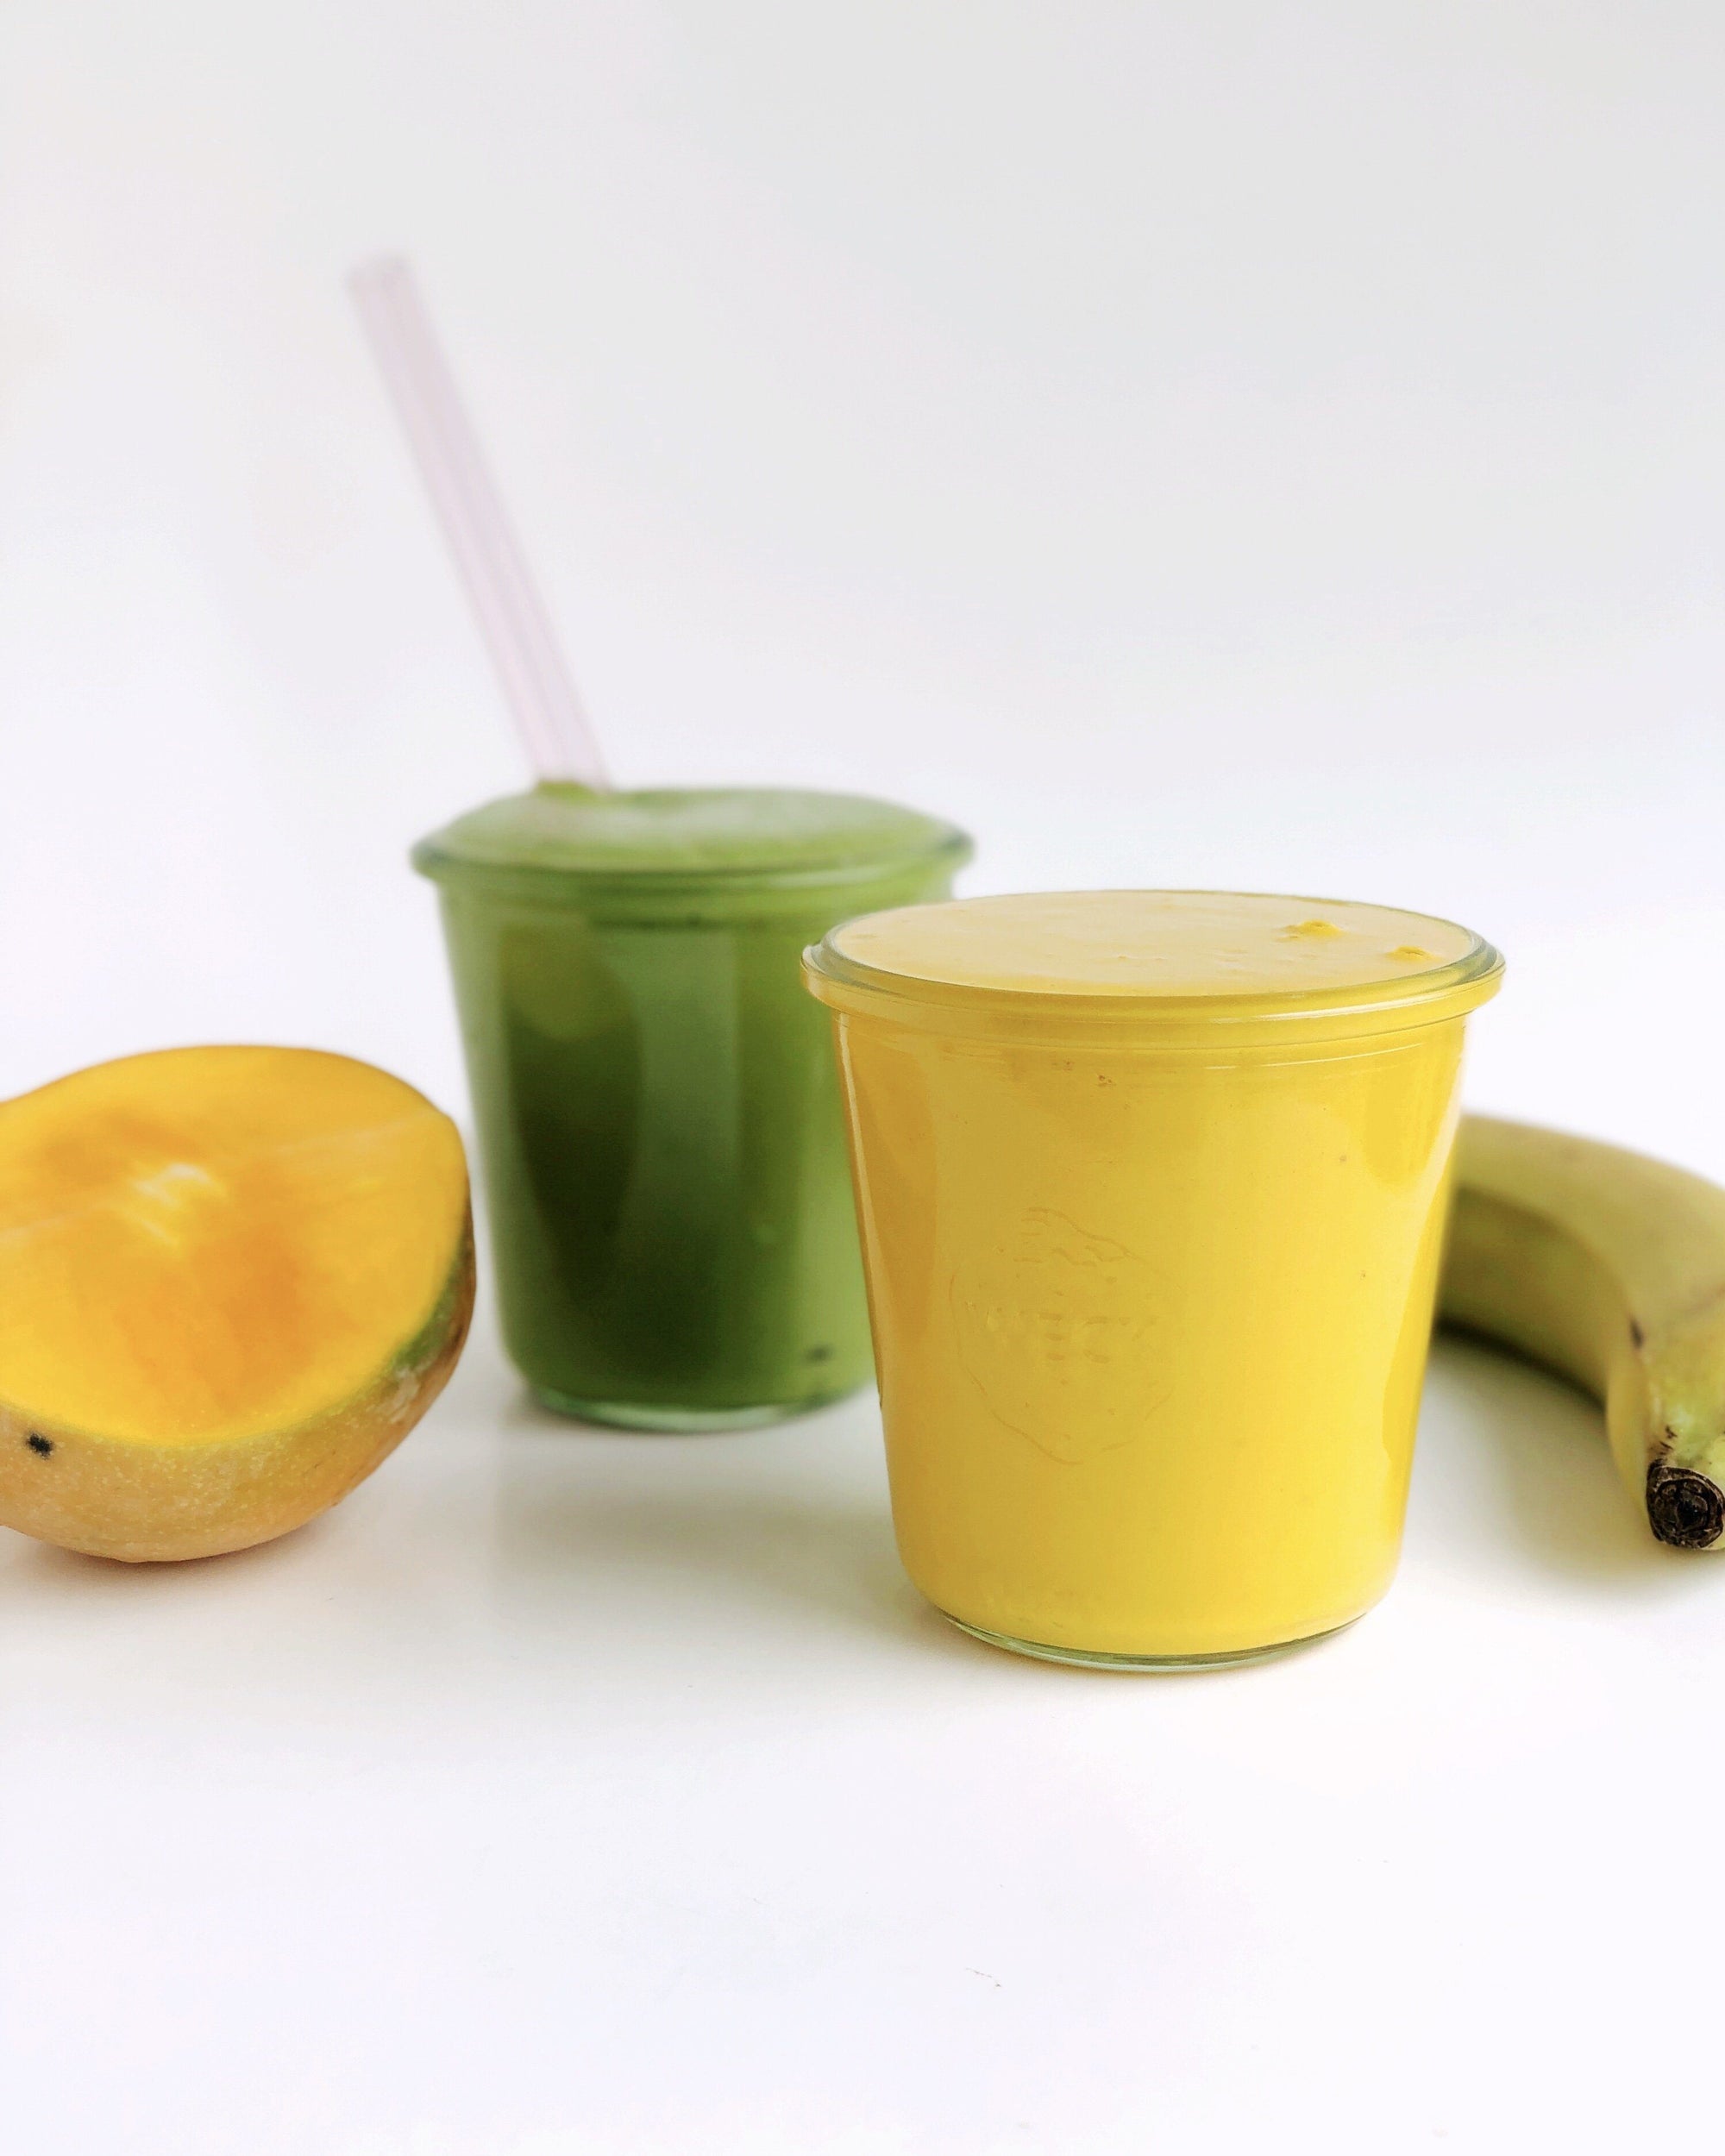 Image of two JOYÀ smoothies featuring the Matcha-Moringa and Turmeric Elixir Blends